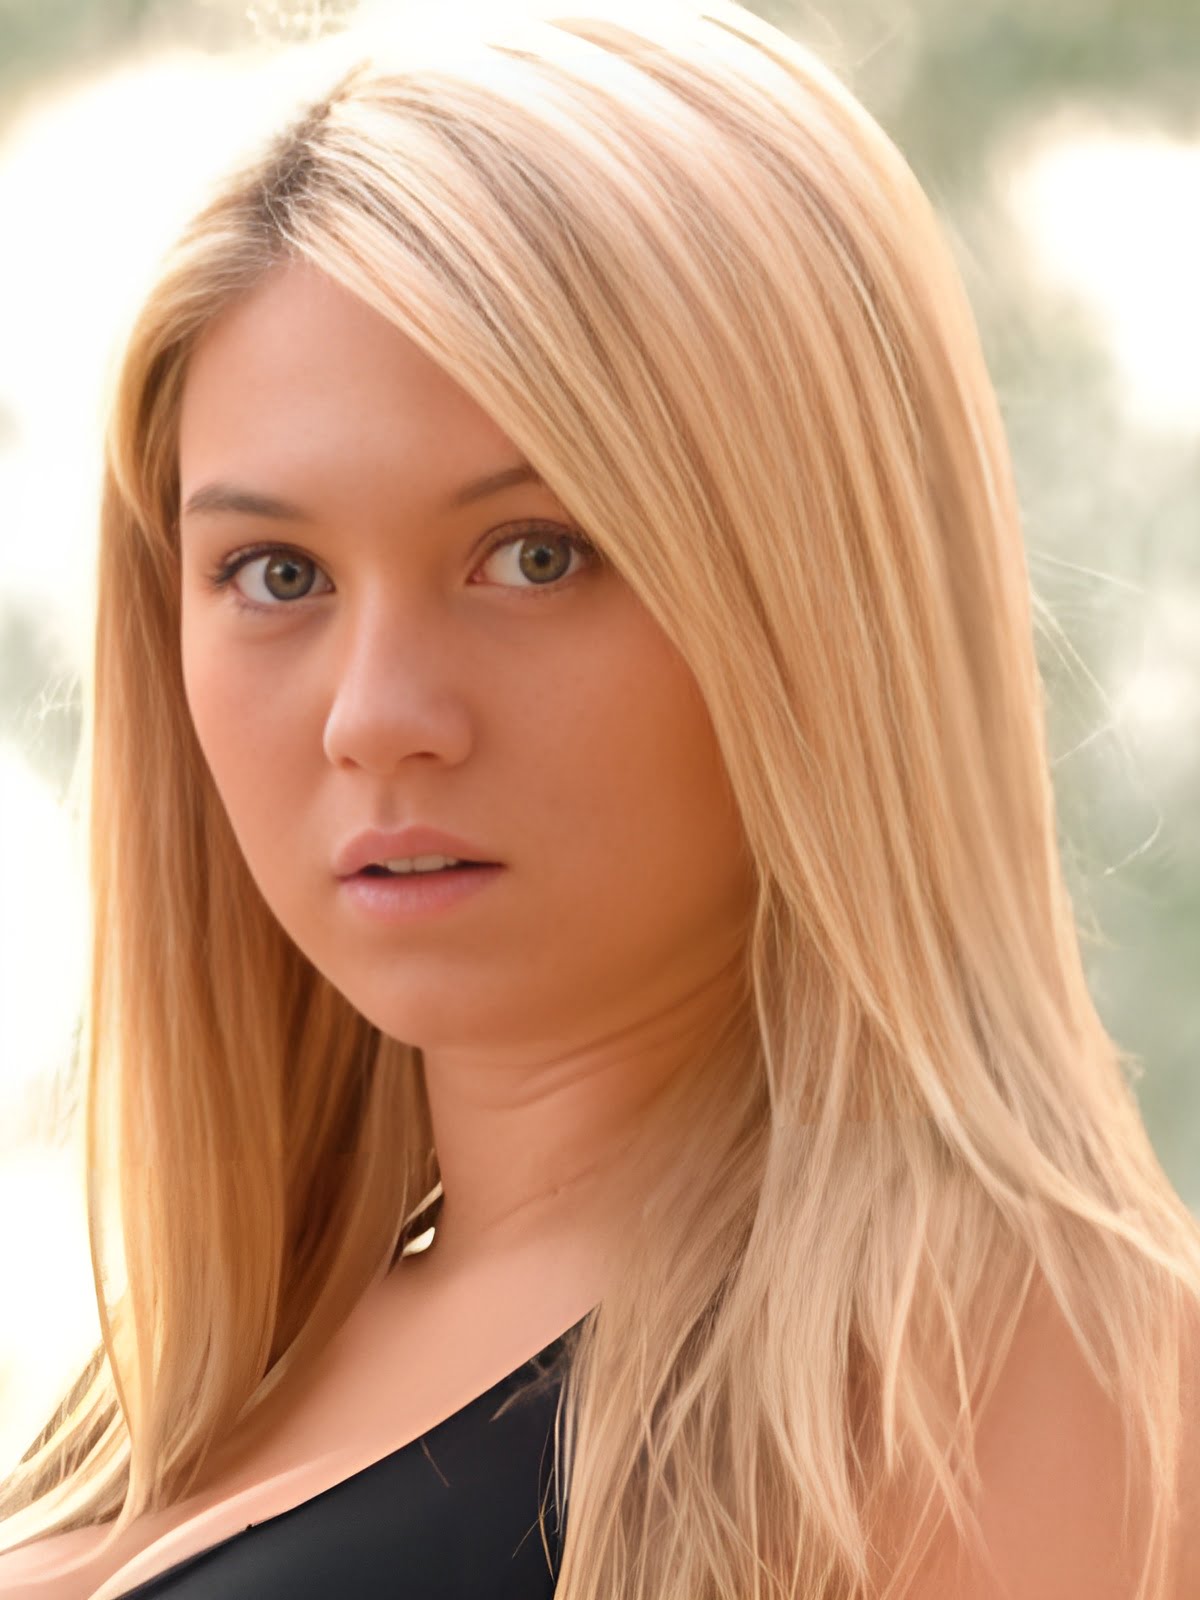 Alison Angel Model Wiki Age Height Bio Weight Photos Career And More